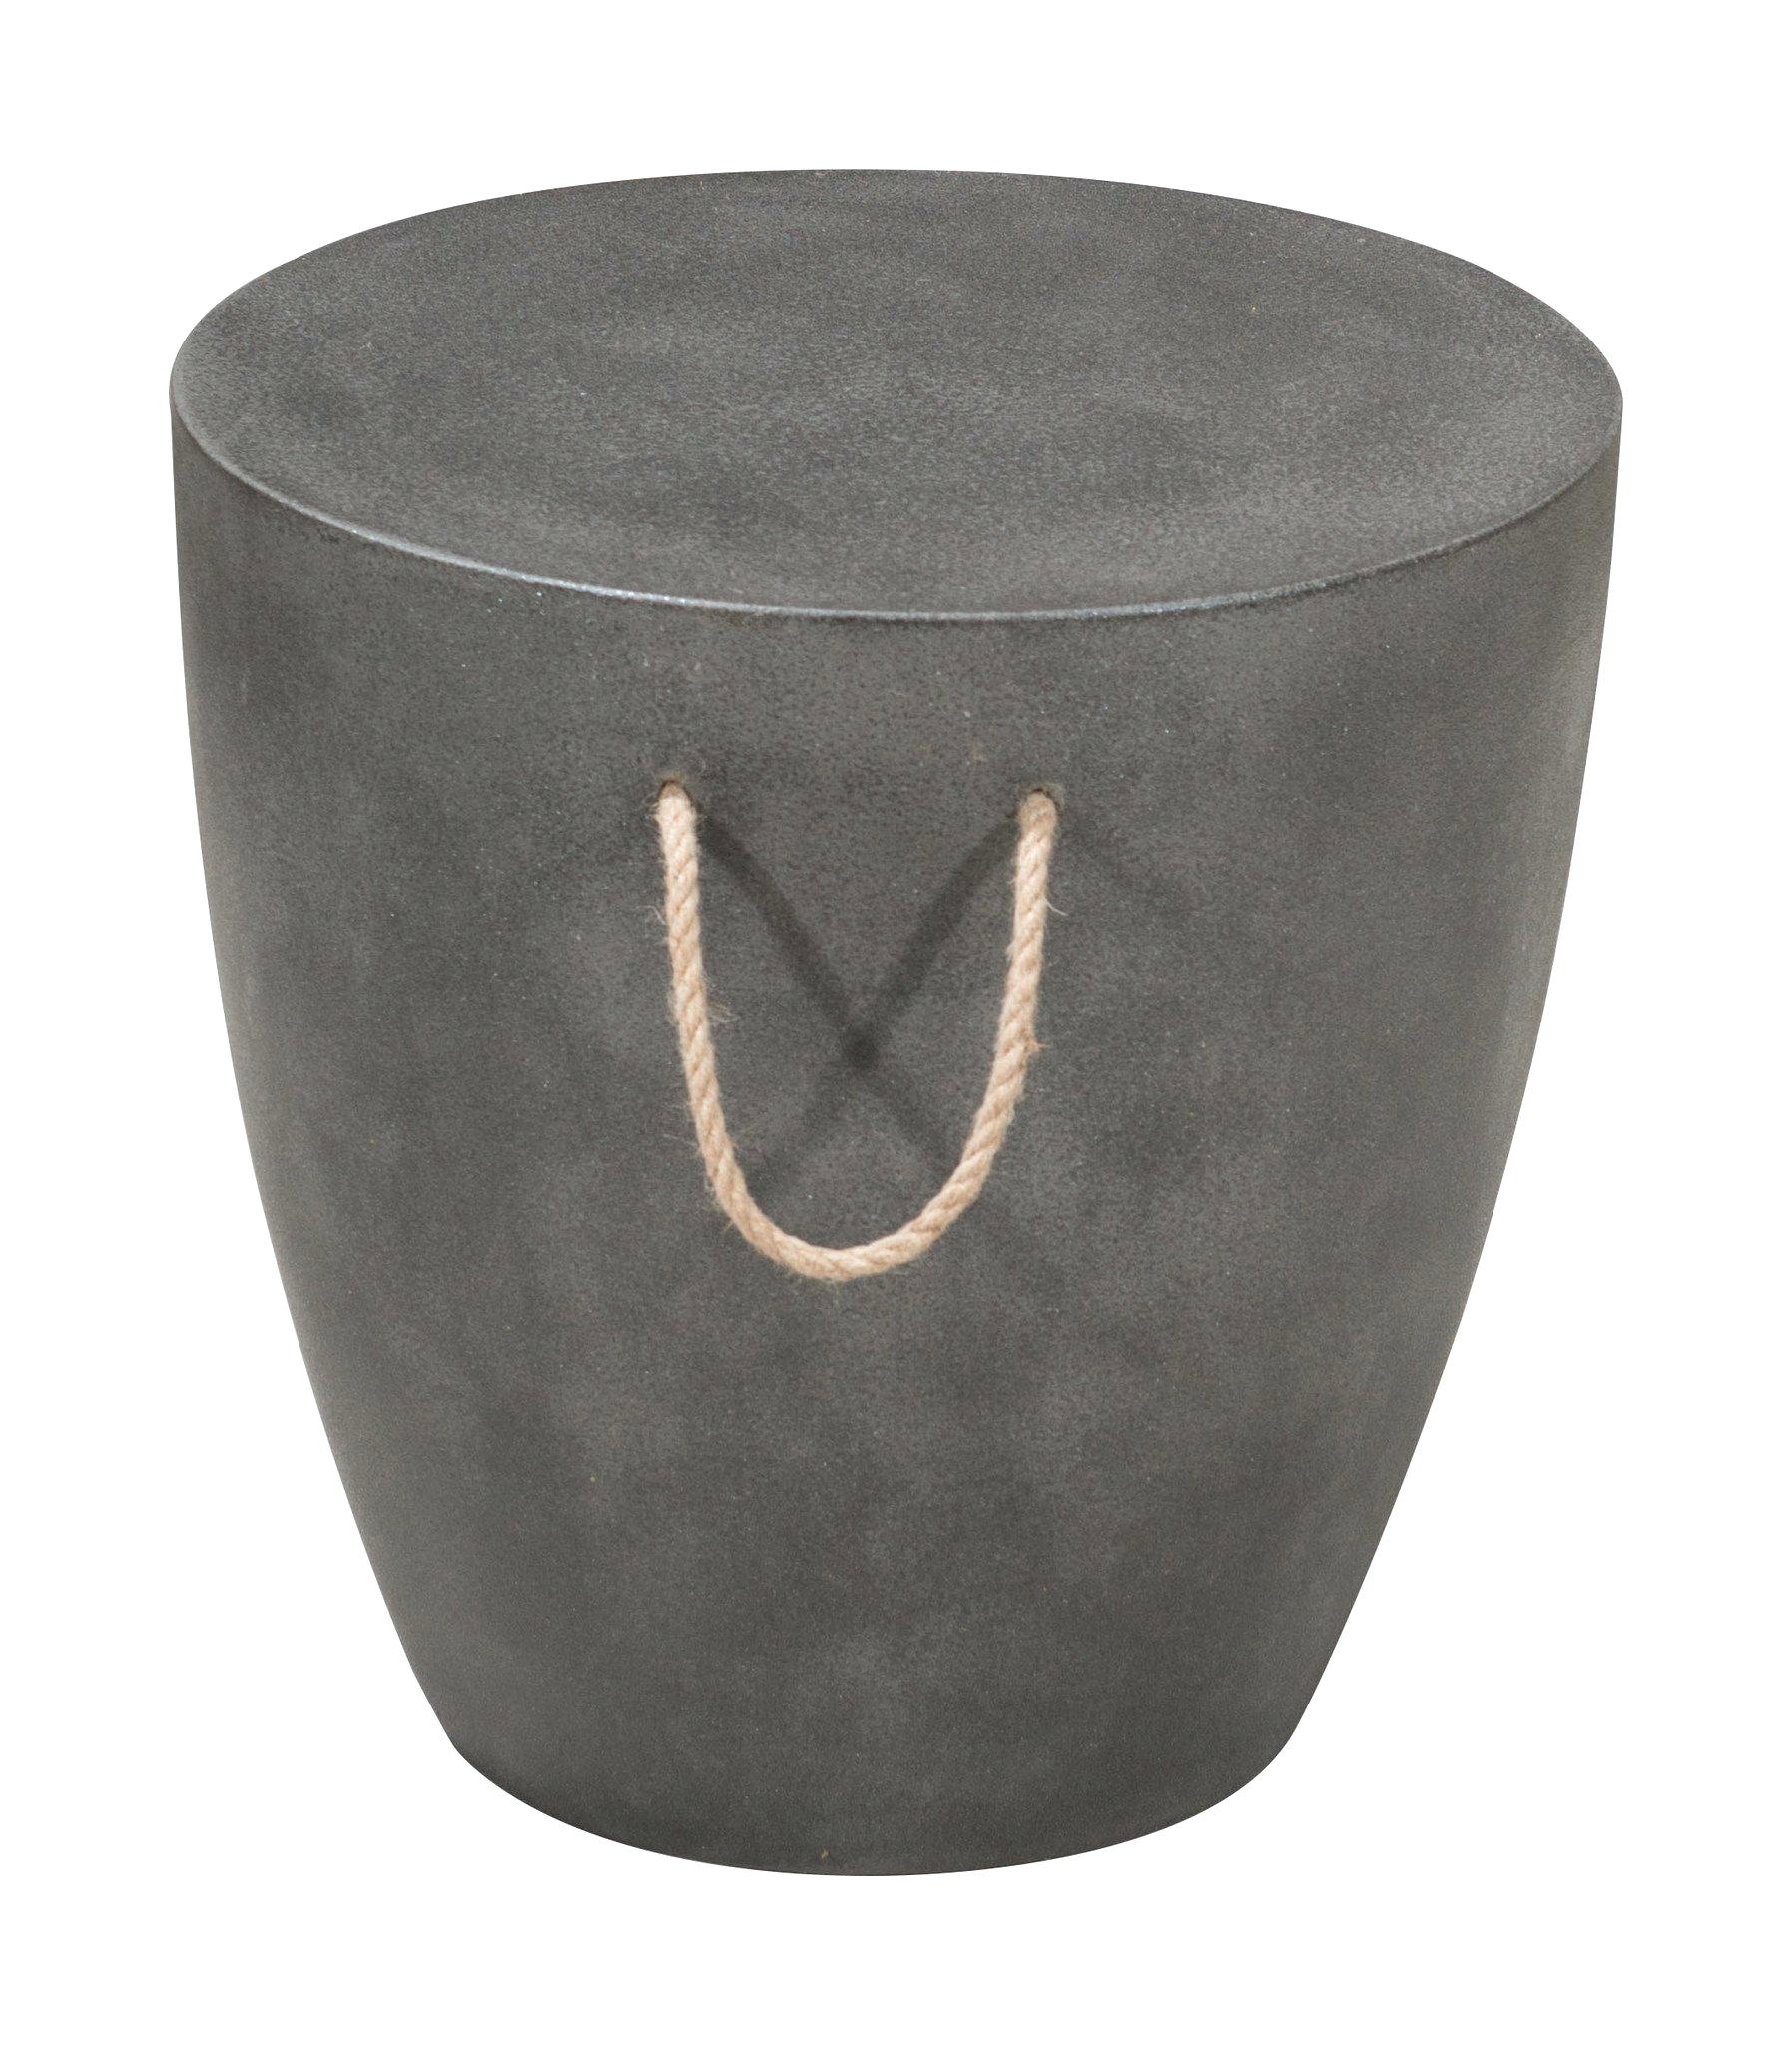 drum accent table threshold metal target cylinder side brown granby entryway chair affordable marble coffee ashley glass black velvet curtains cotton linens york furniture pier